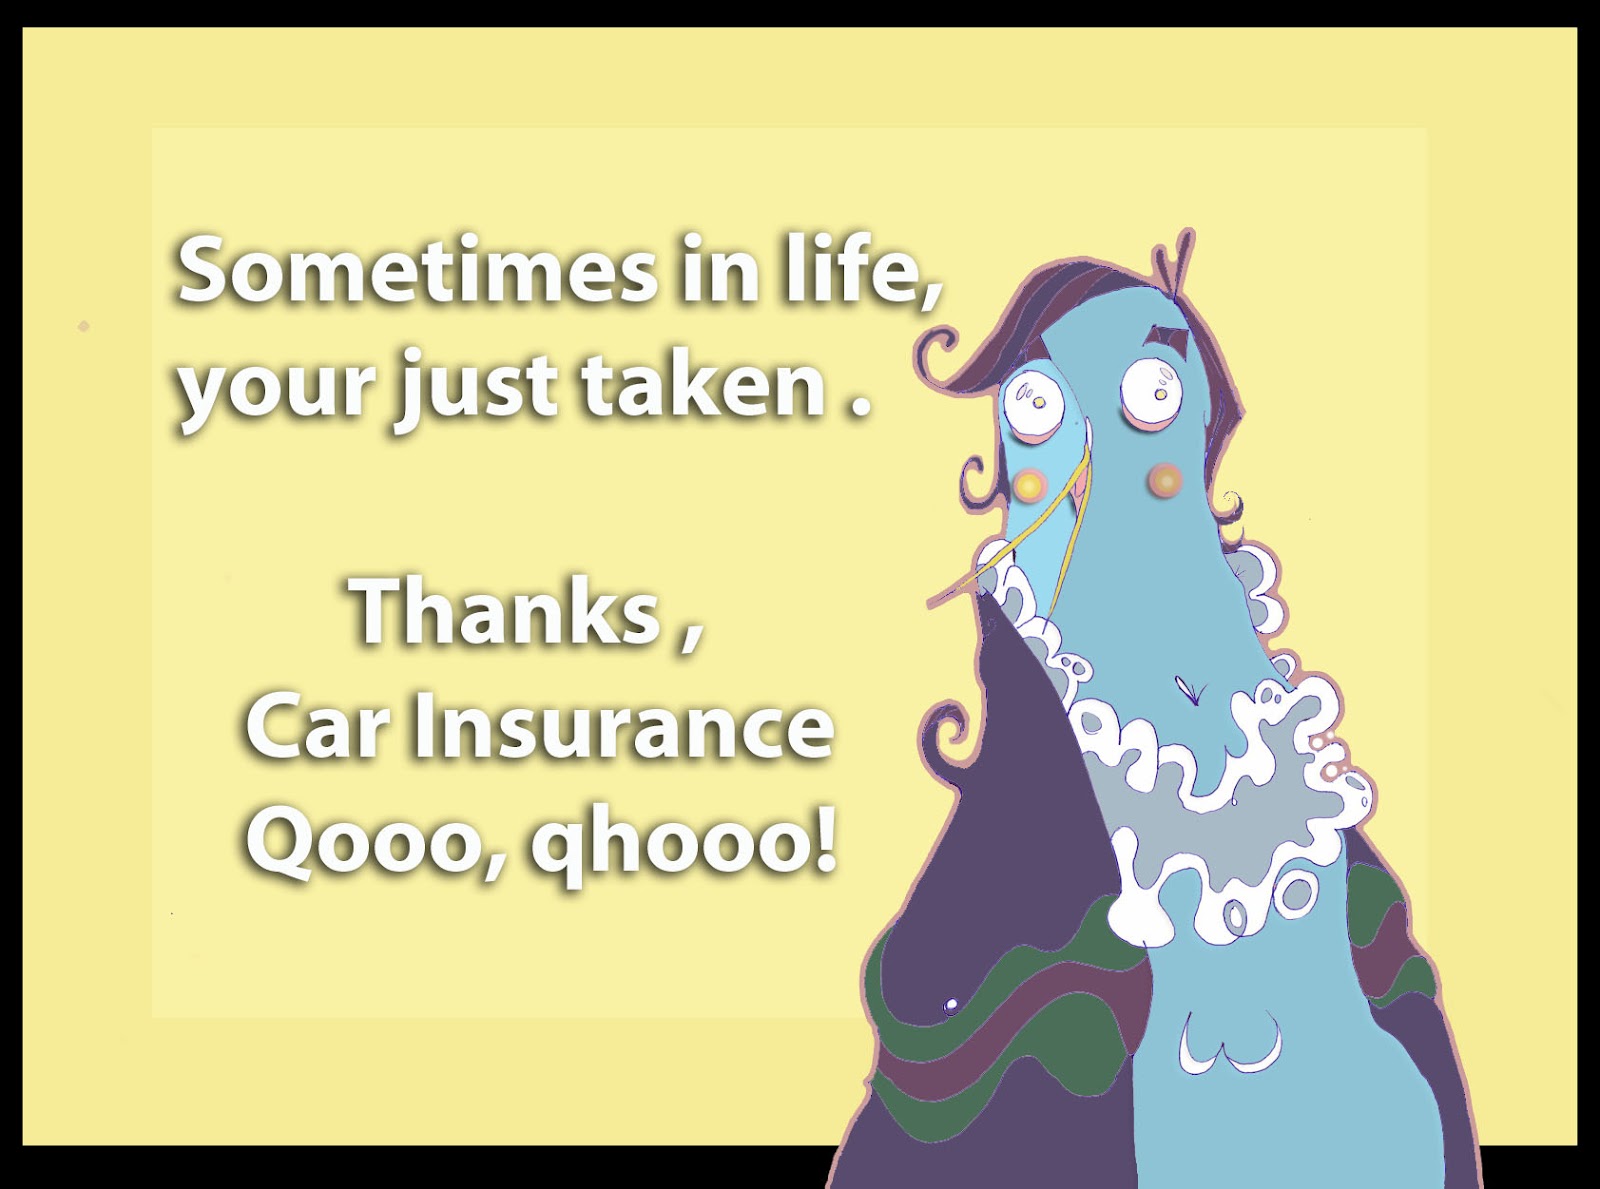 Hours Ago Some Cool Car Dealership Images The Sunglass Wearing Pink Elephant On What Is The Cheapest Online Car Insurance For An Yr Old Male Motor Car Insurance Motor Insurance Multi Car Insurance Multiple Car 